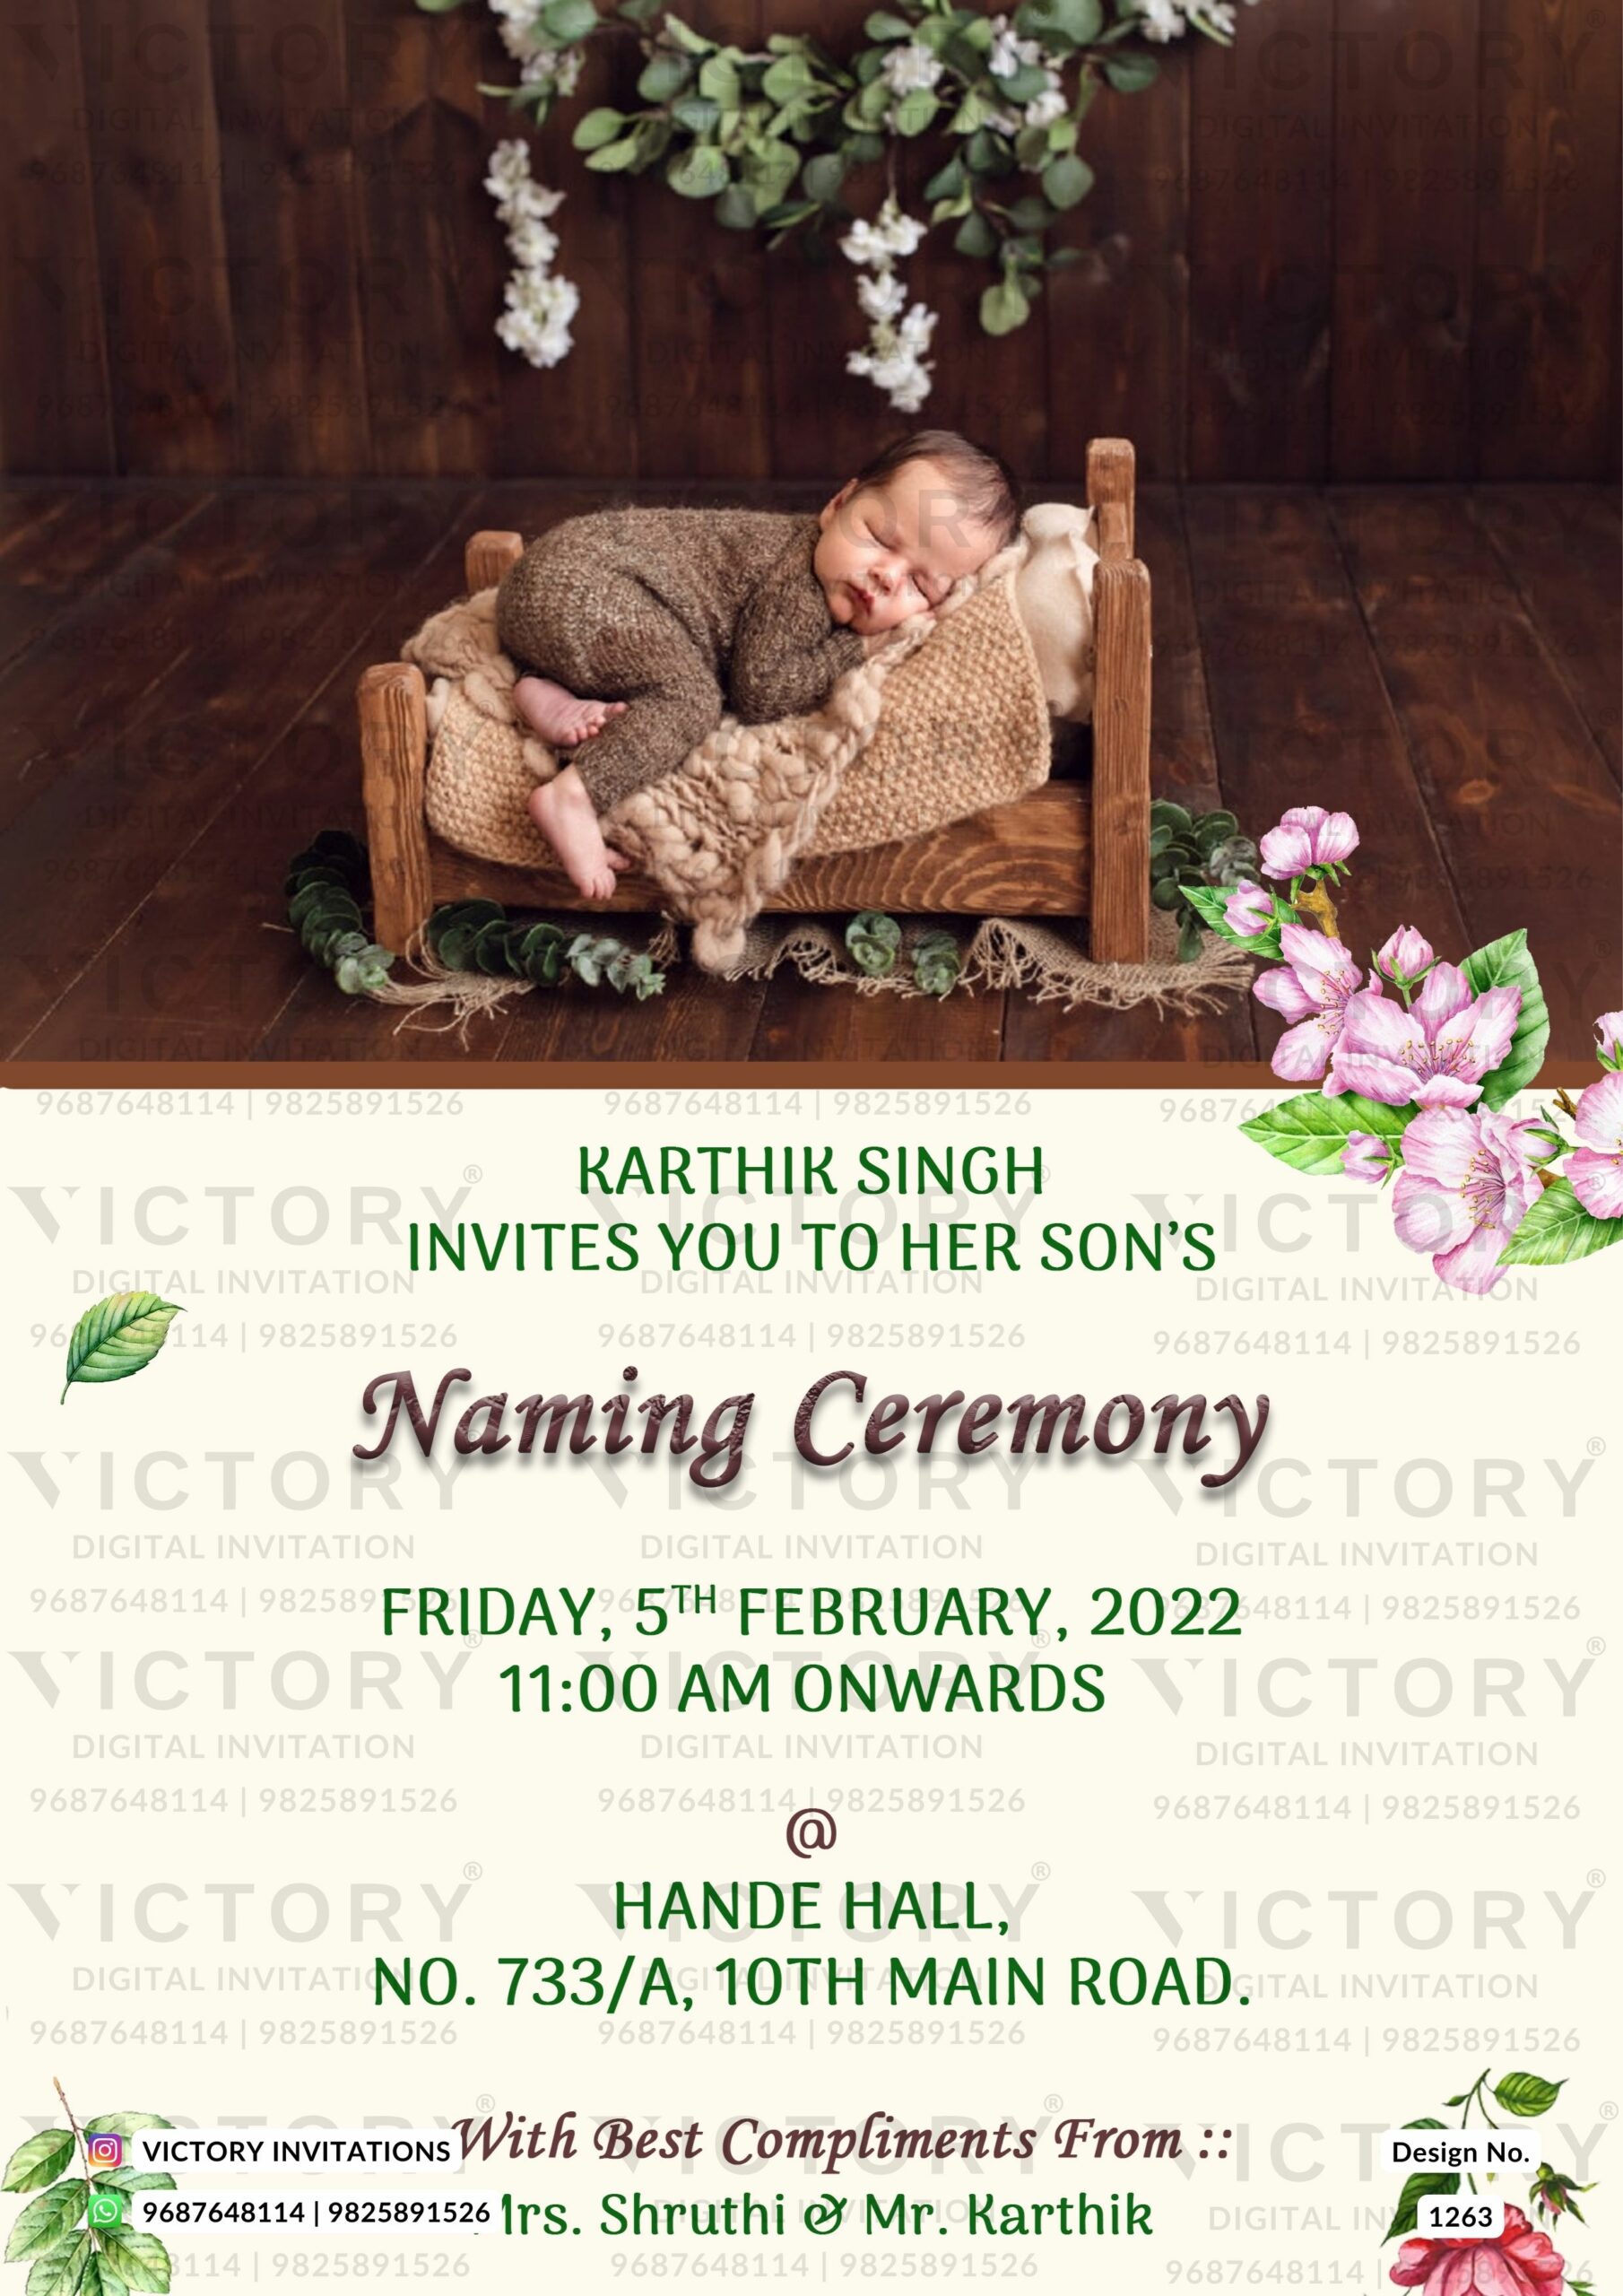 New Chocolate-Brown and Ivory Floral Theme Digital Naming Ceremony  Invitation card with Original Baby Portrait, design no. 1263 -  